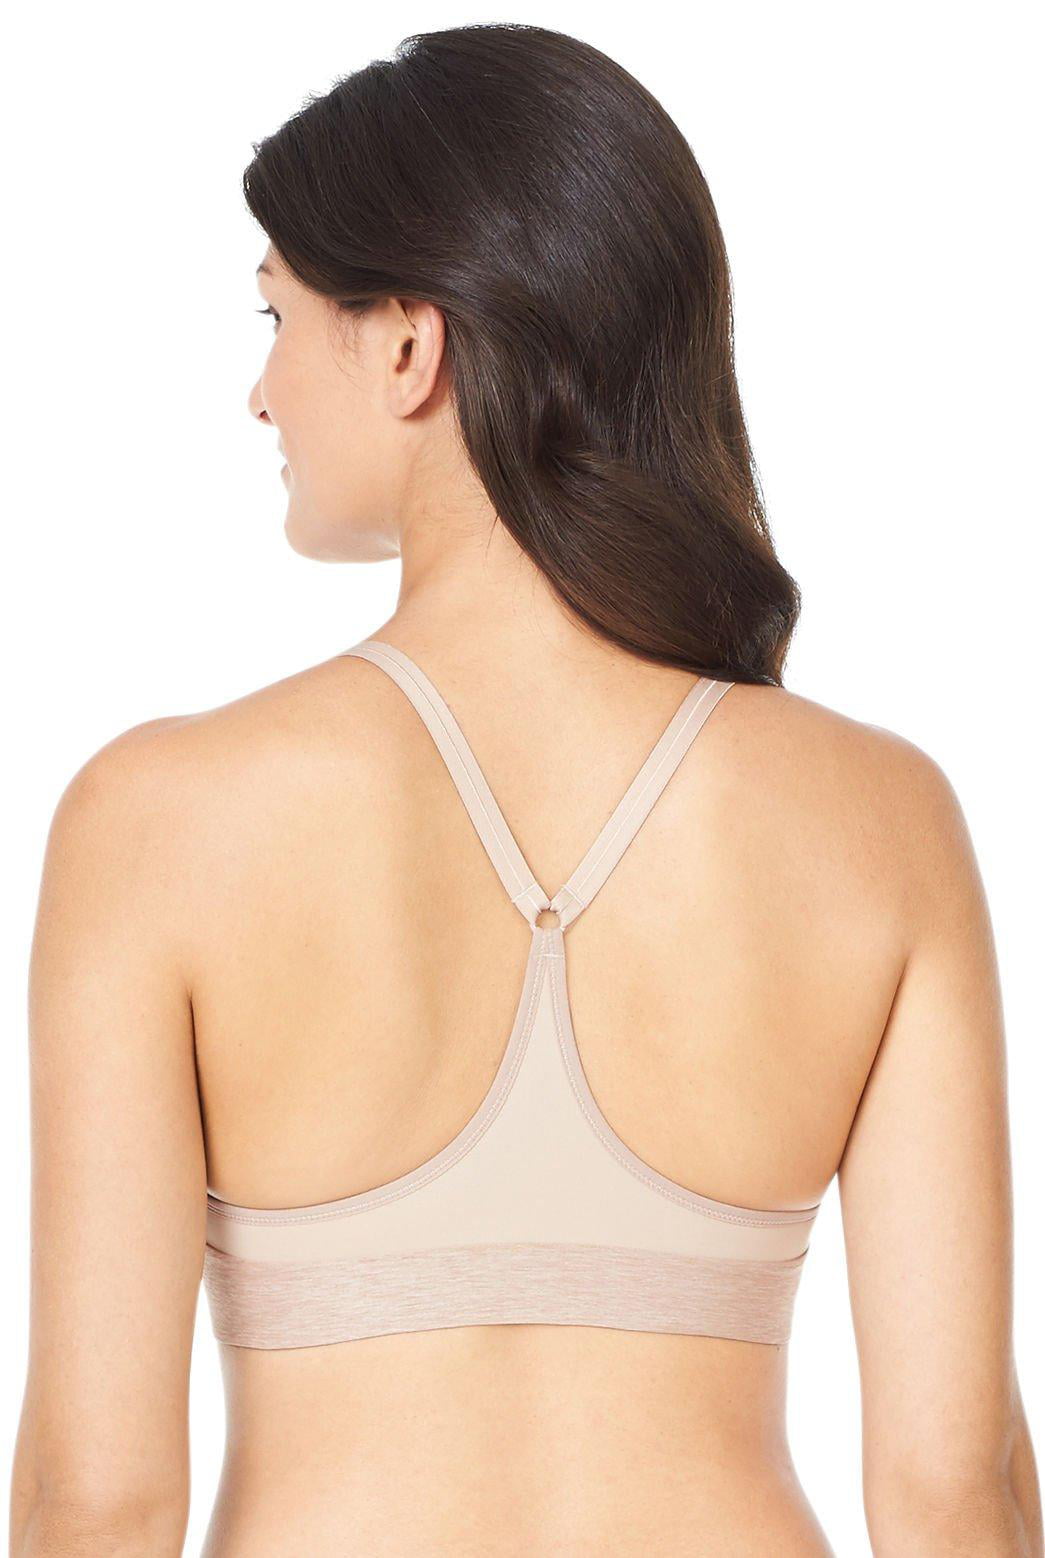 Women's Warner's RM4281A Play it Cool Wire-Free Cooling Racerback Bra  (White 38D) 